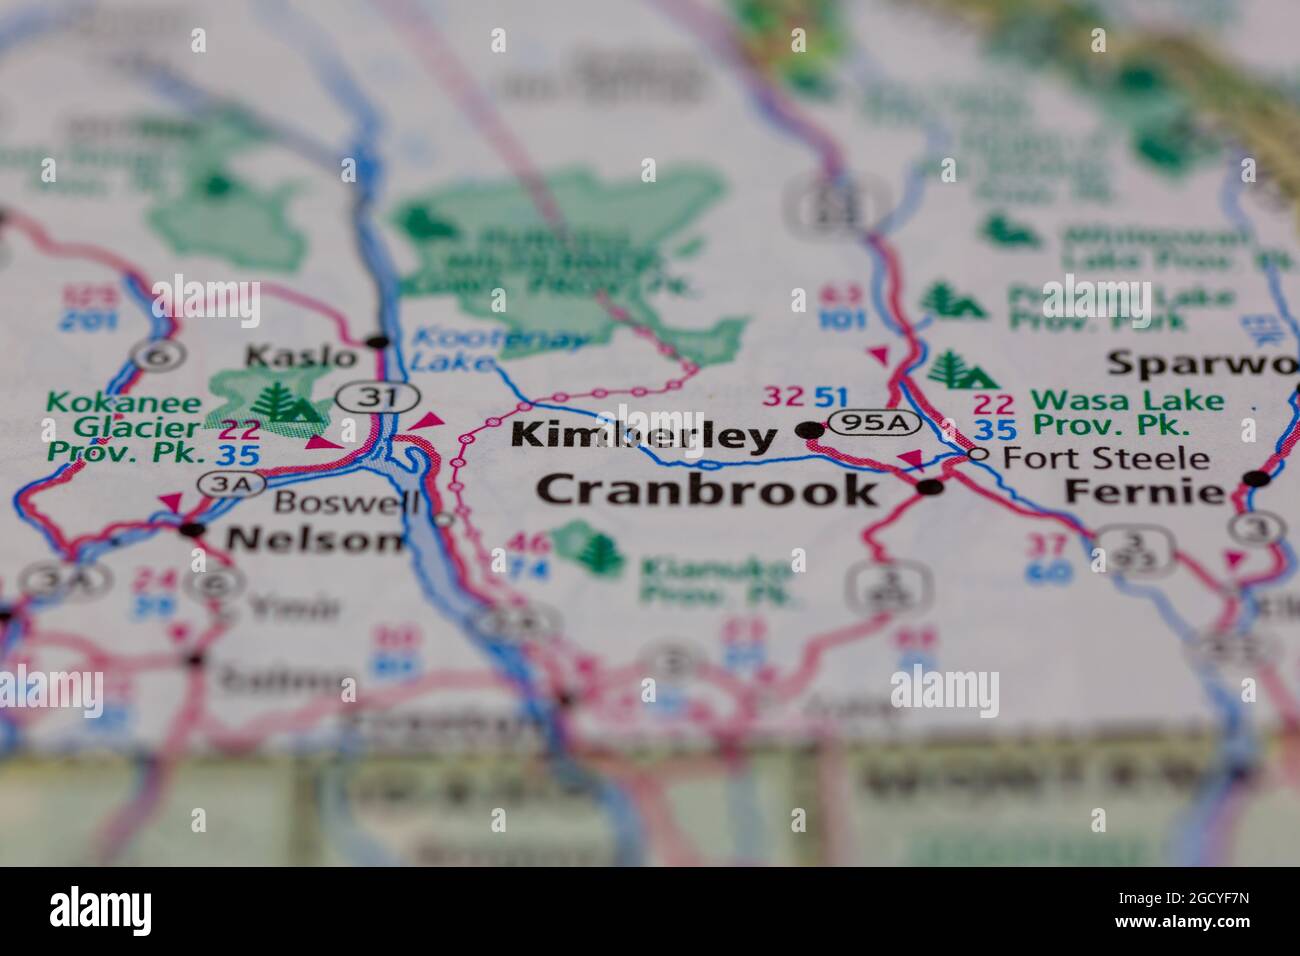 Kimberley British Columbia Canada shown on a road map or Geography map Stock Photo